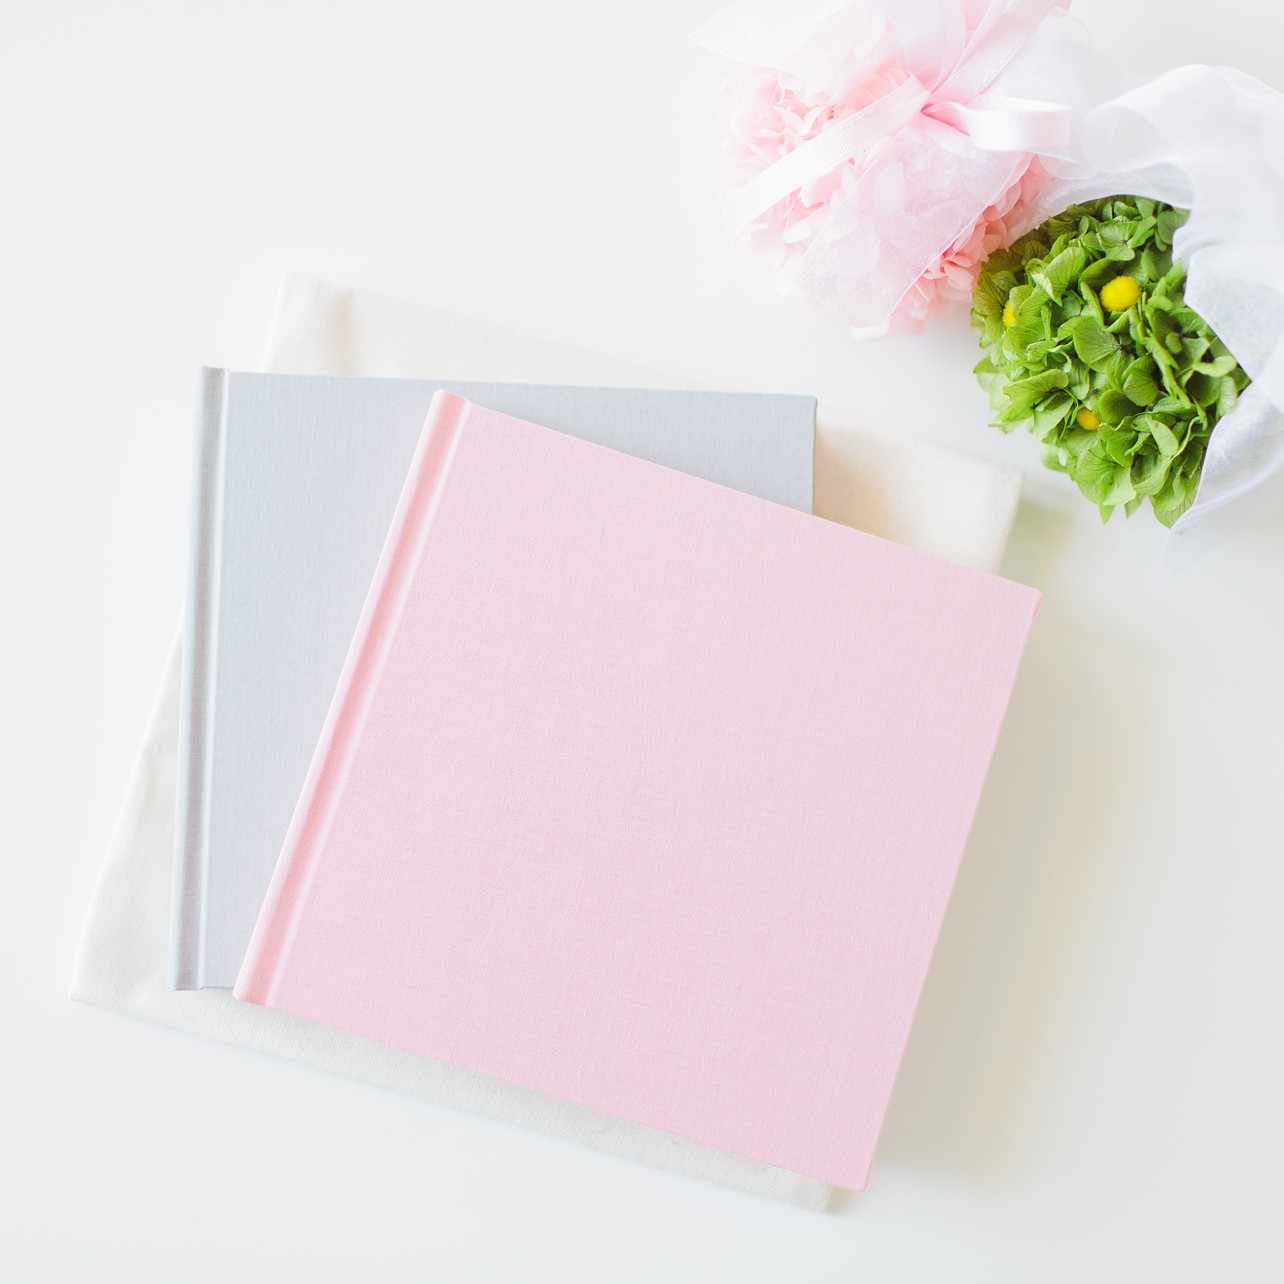 Gray and Pink Linen Photo Albums with pink and green ball preserved flower - Portrait Experience